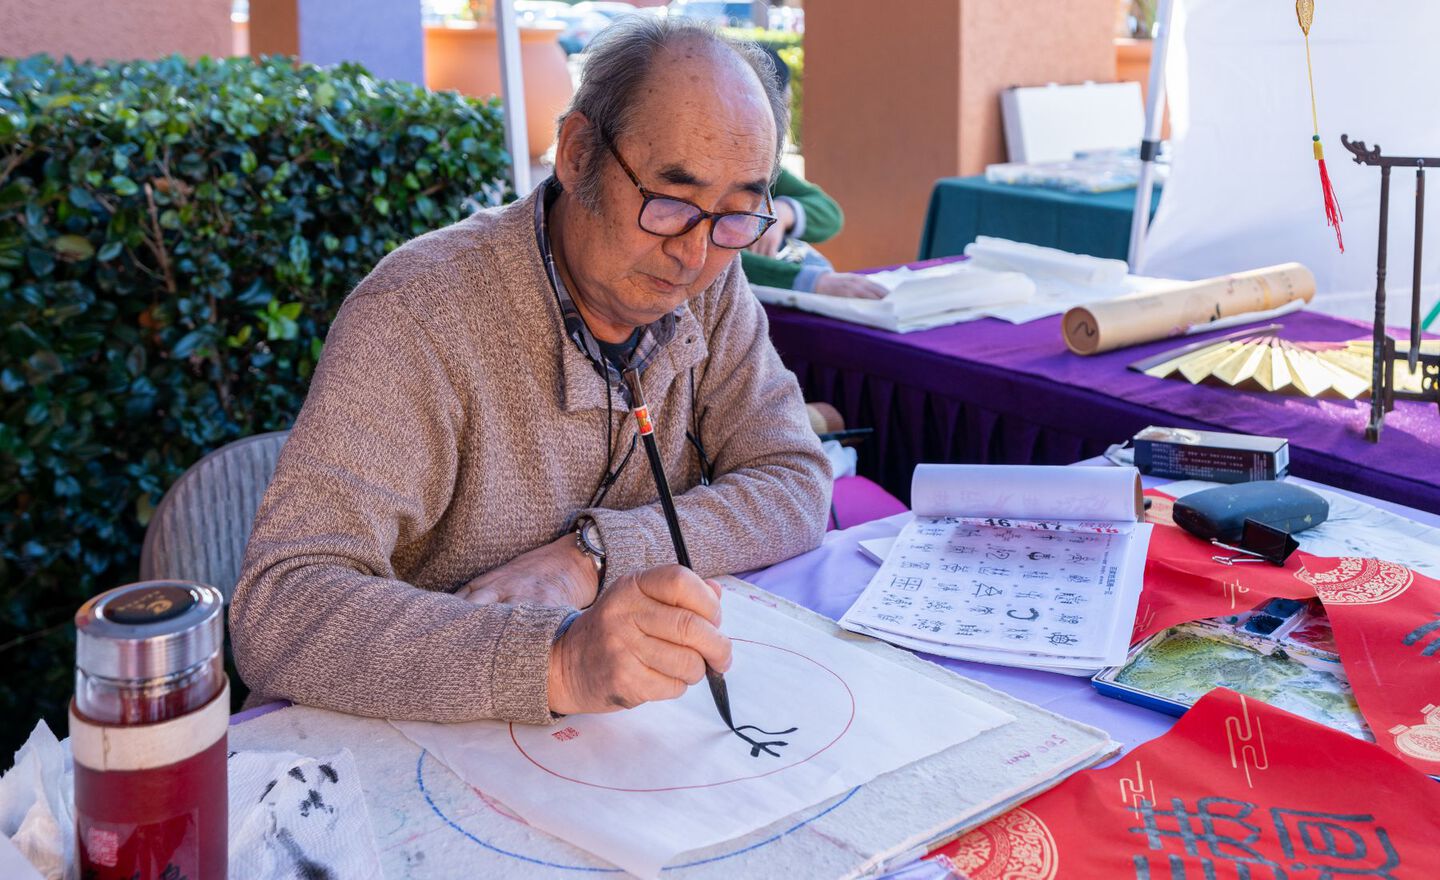 A man painting calligraphy couplets within a circle on a piece of paper